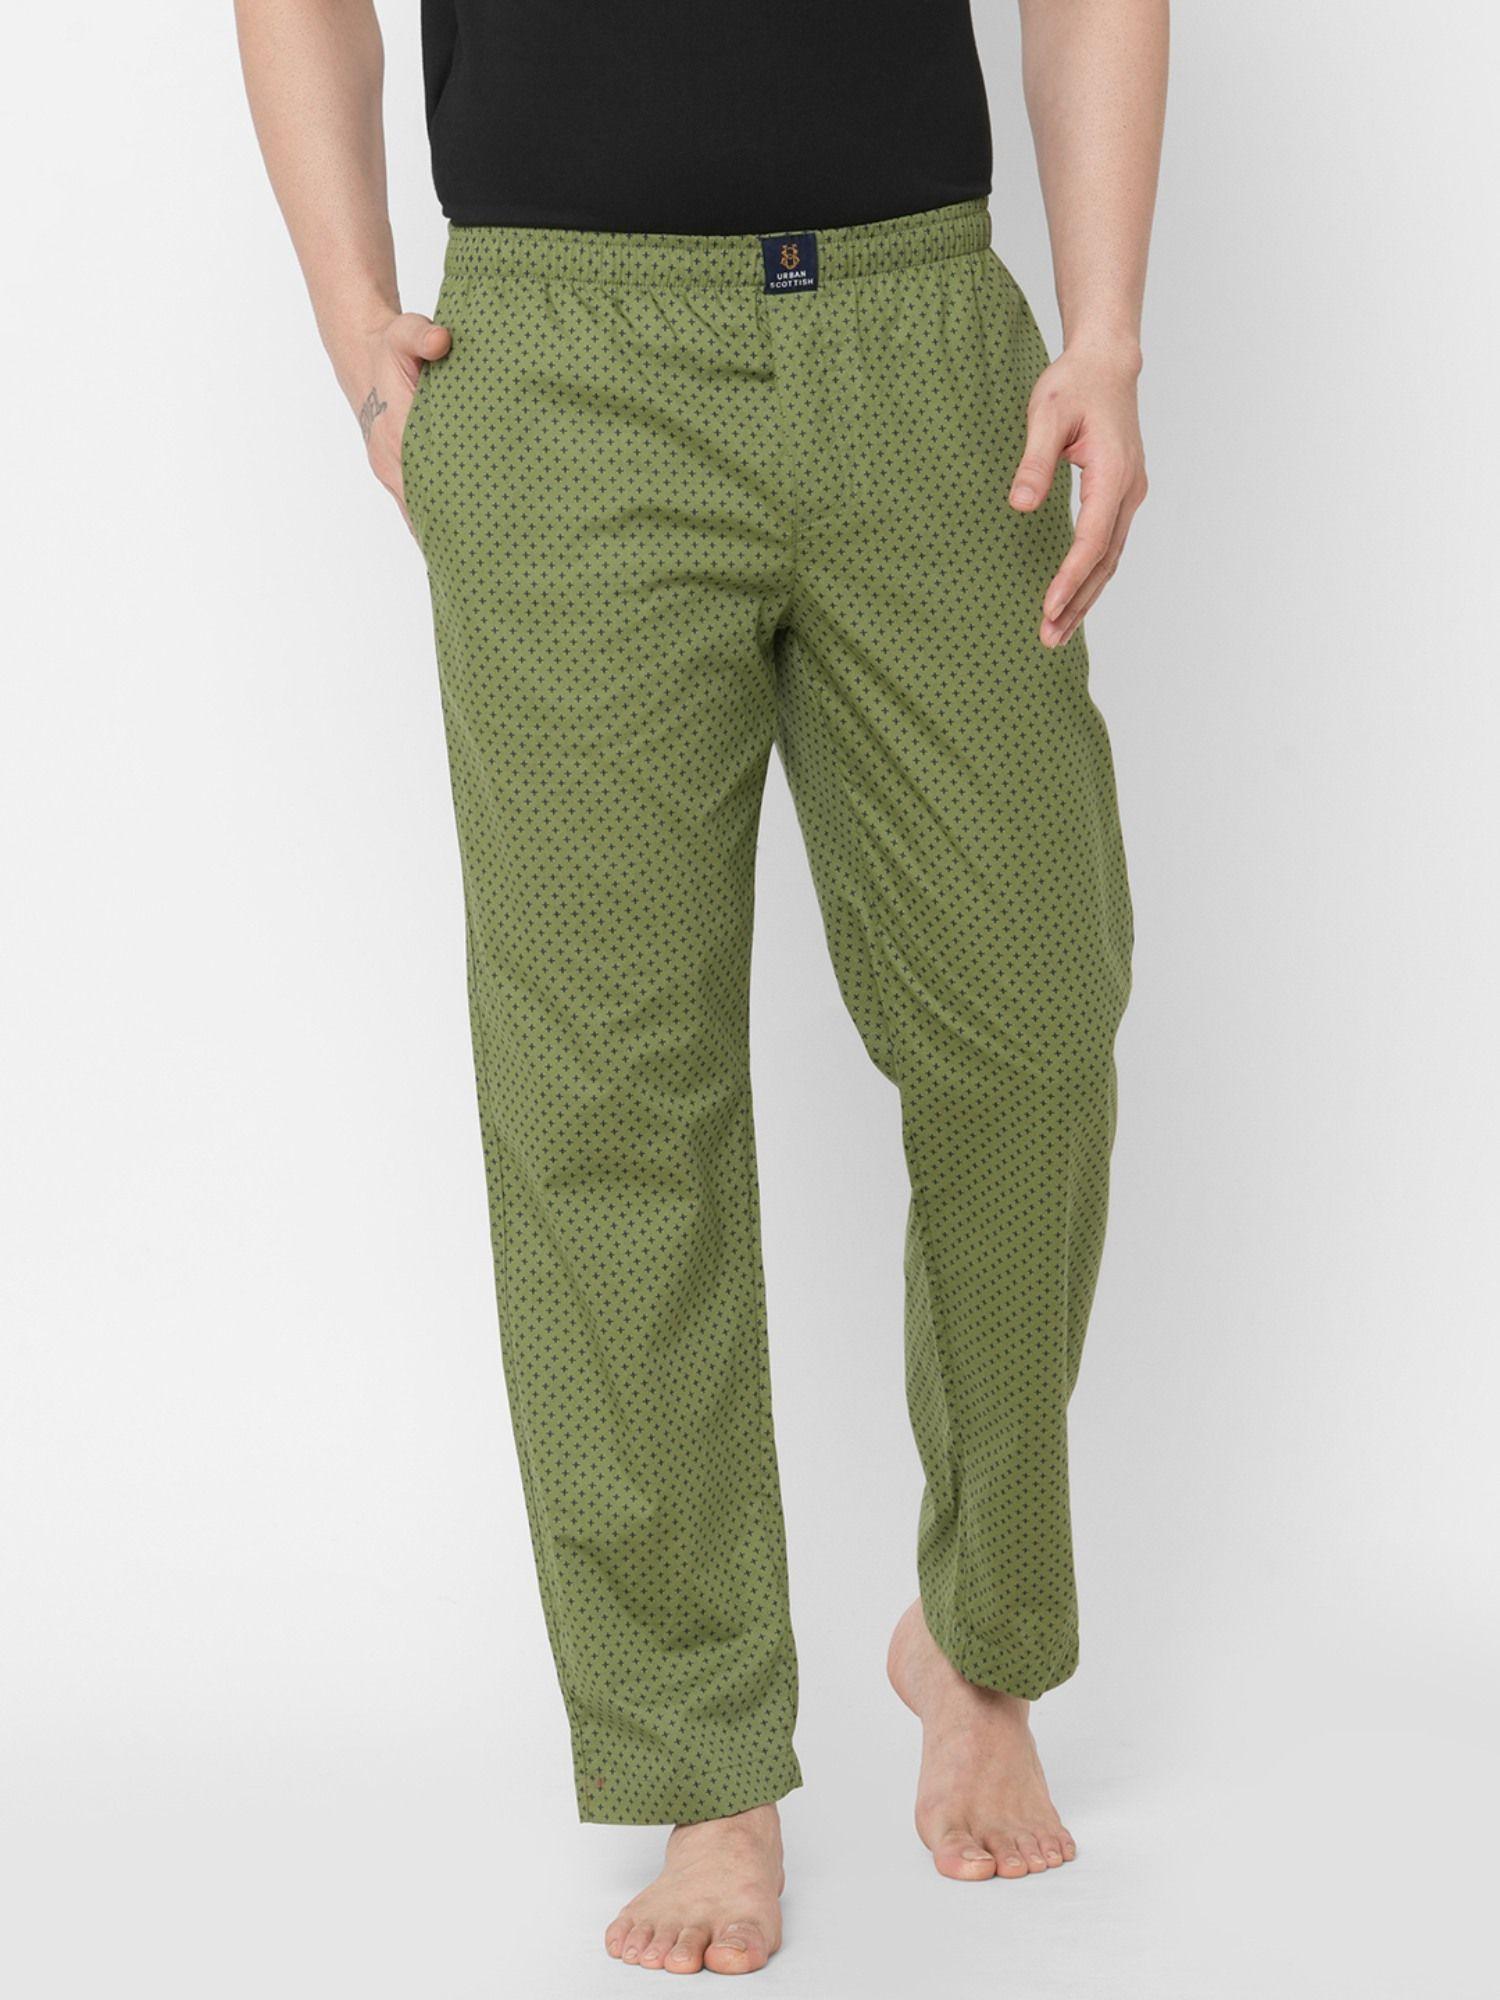 mens printed woven cotton ultra soft pyjama with pockets olive